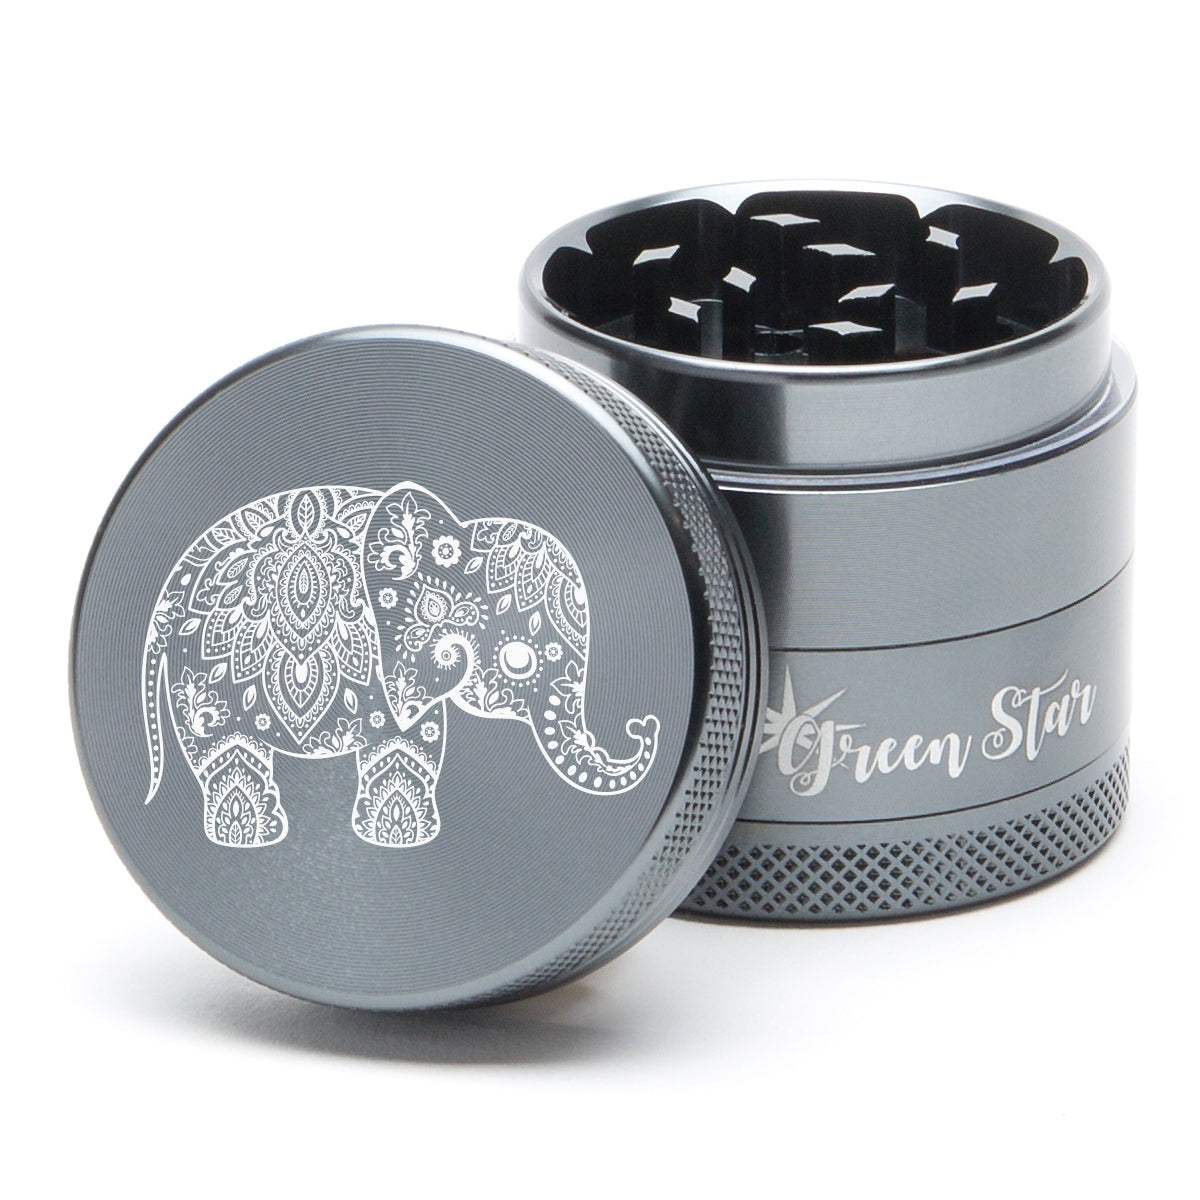 Green Star Creature Small 4-Piece Grinder by Green Star | Mission Dispensary